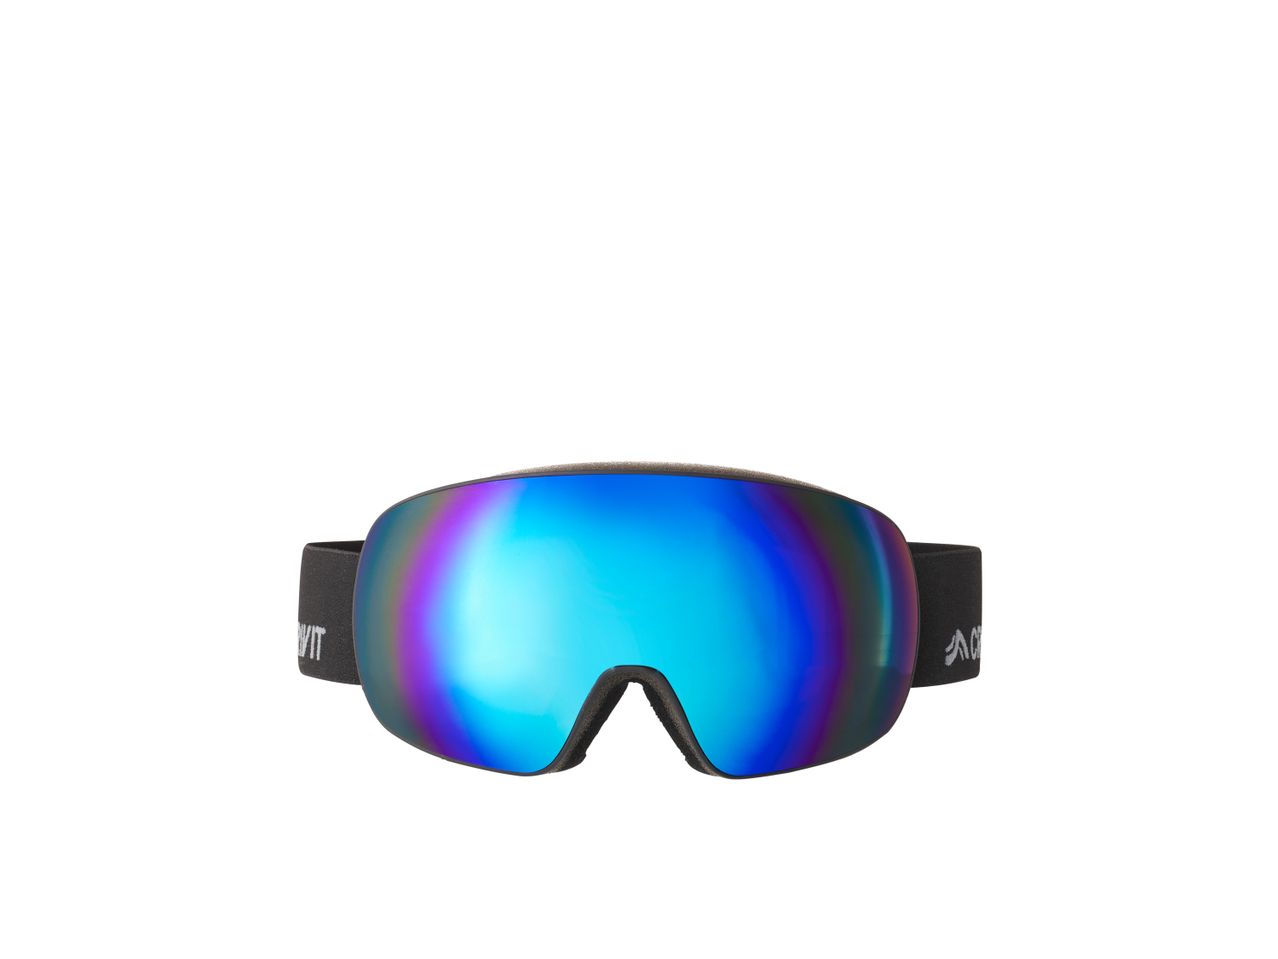 Go to full screen view: Ski & Snowboarding Goggles - Image 1